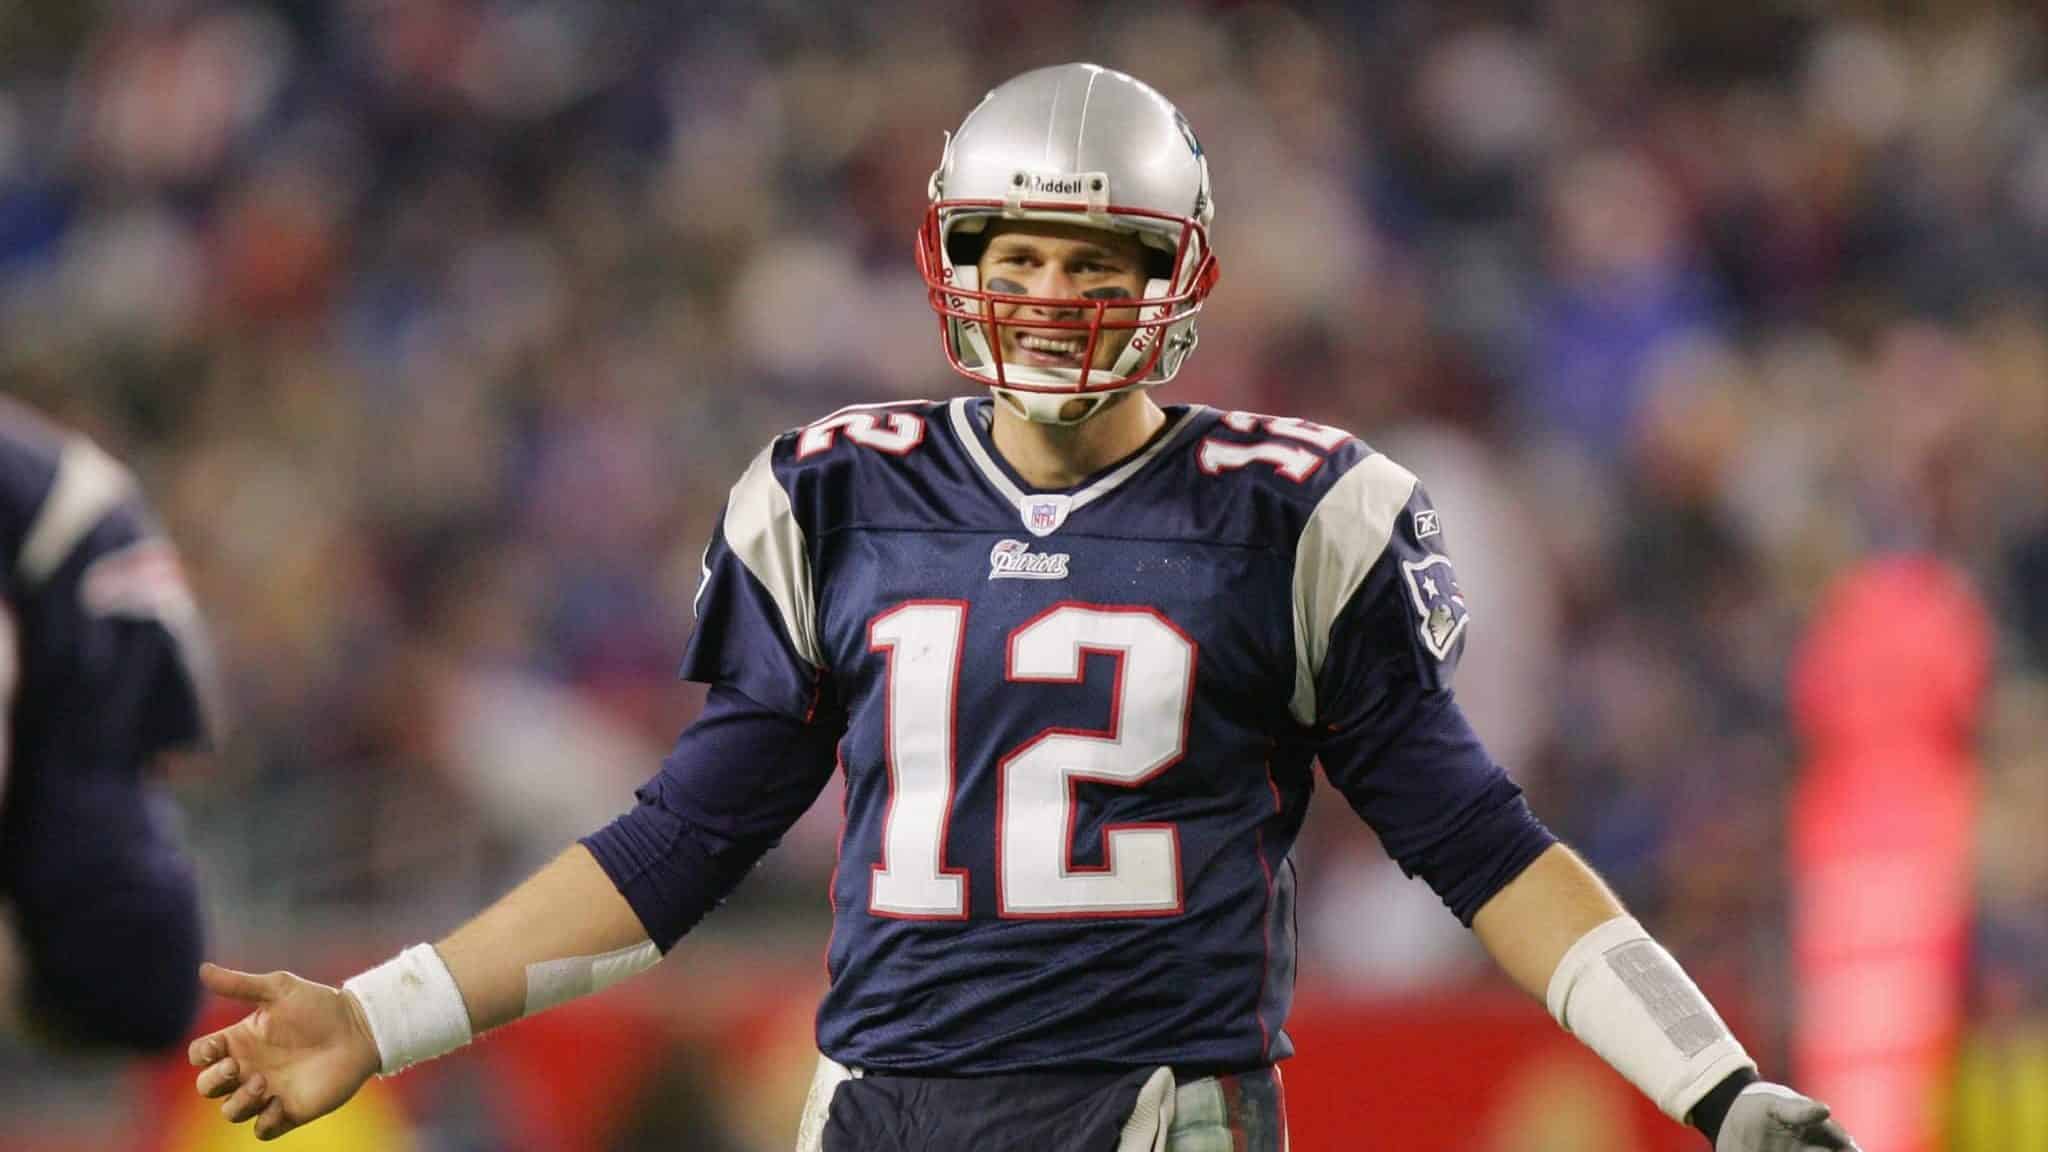 FOXBORO, MA - NOVEMBER 14: Quarterback Tom Brady #12 of the New England Patriots celebrates during the game against the Buffalo Bills at Gillette Stadium on November 14, 2004 in Foxboro, Massachusetts. The Patriots defeated the Bills 29-6.